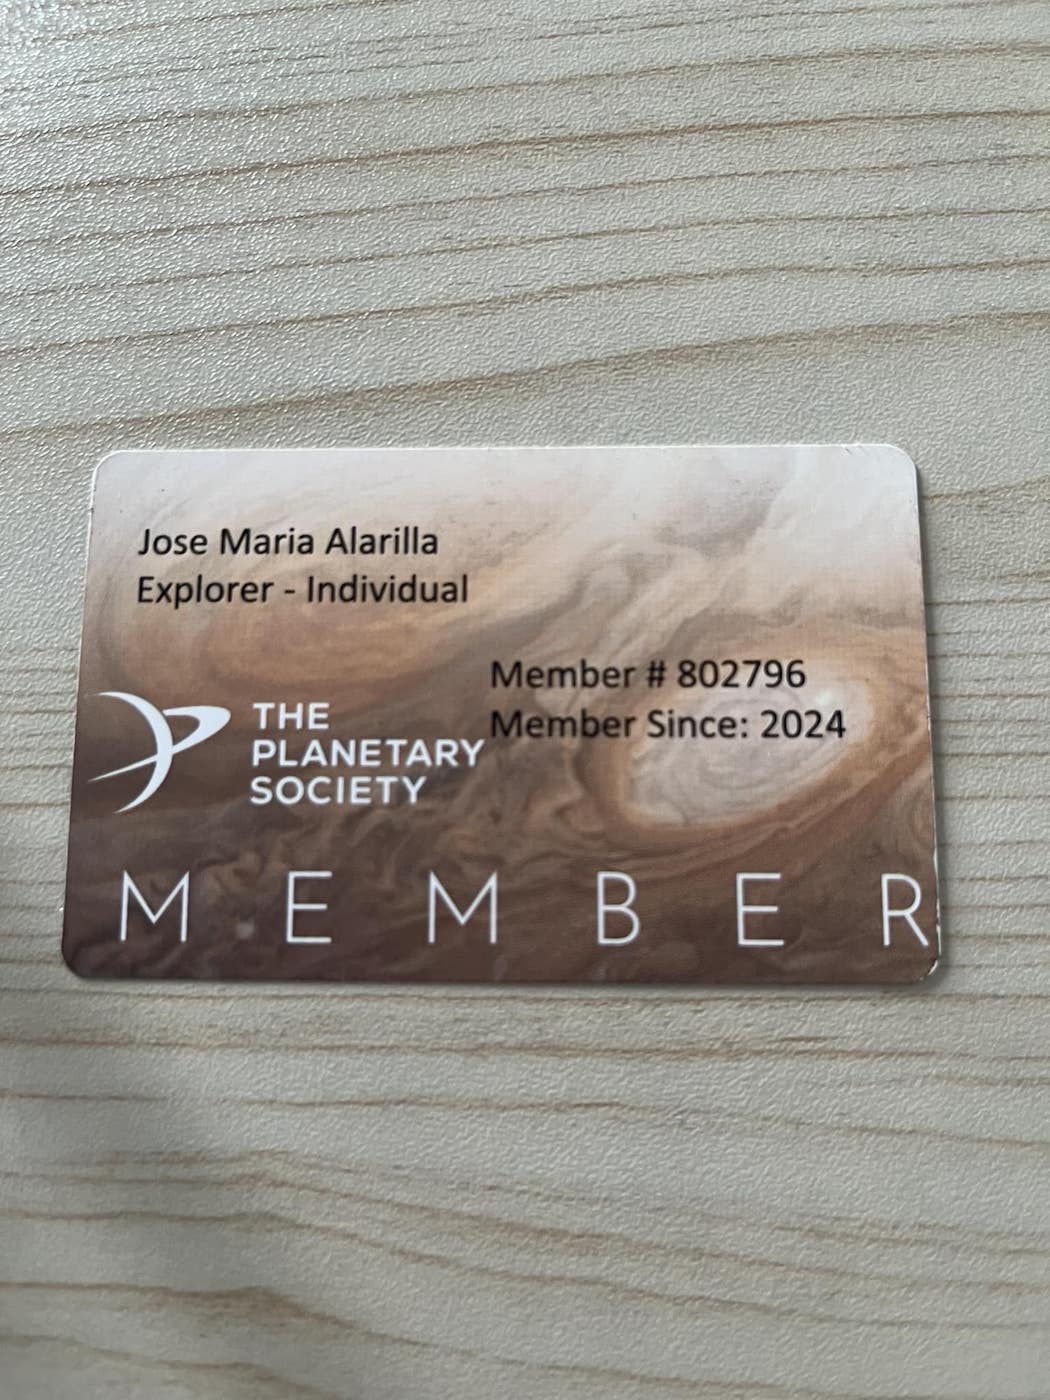 The Planetary Society and me